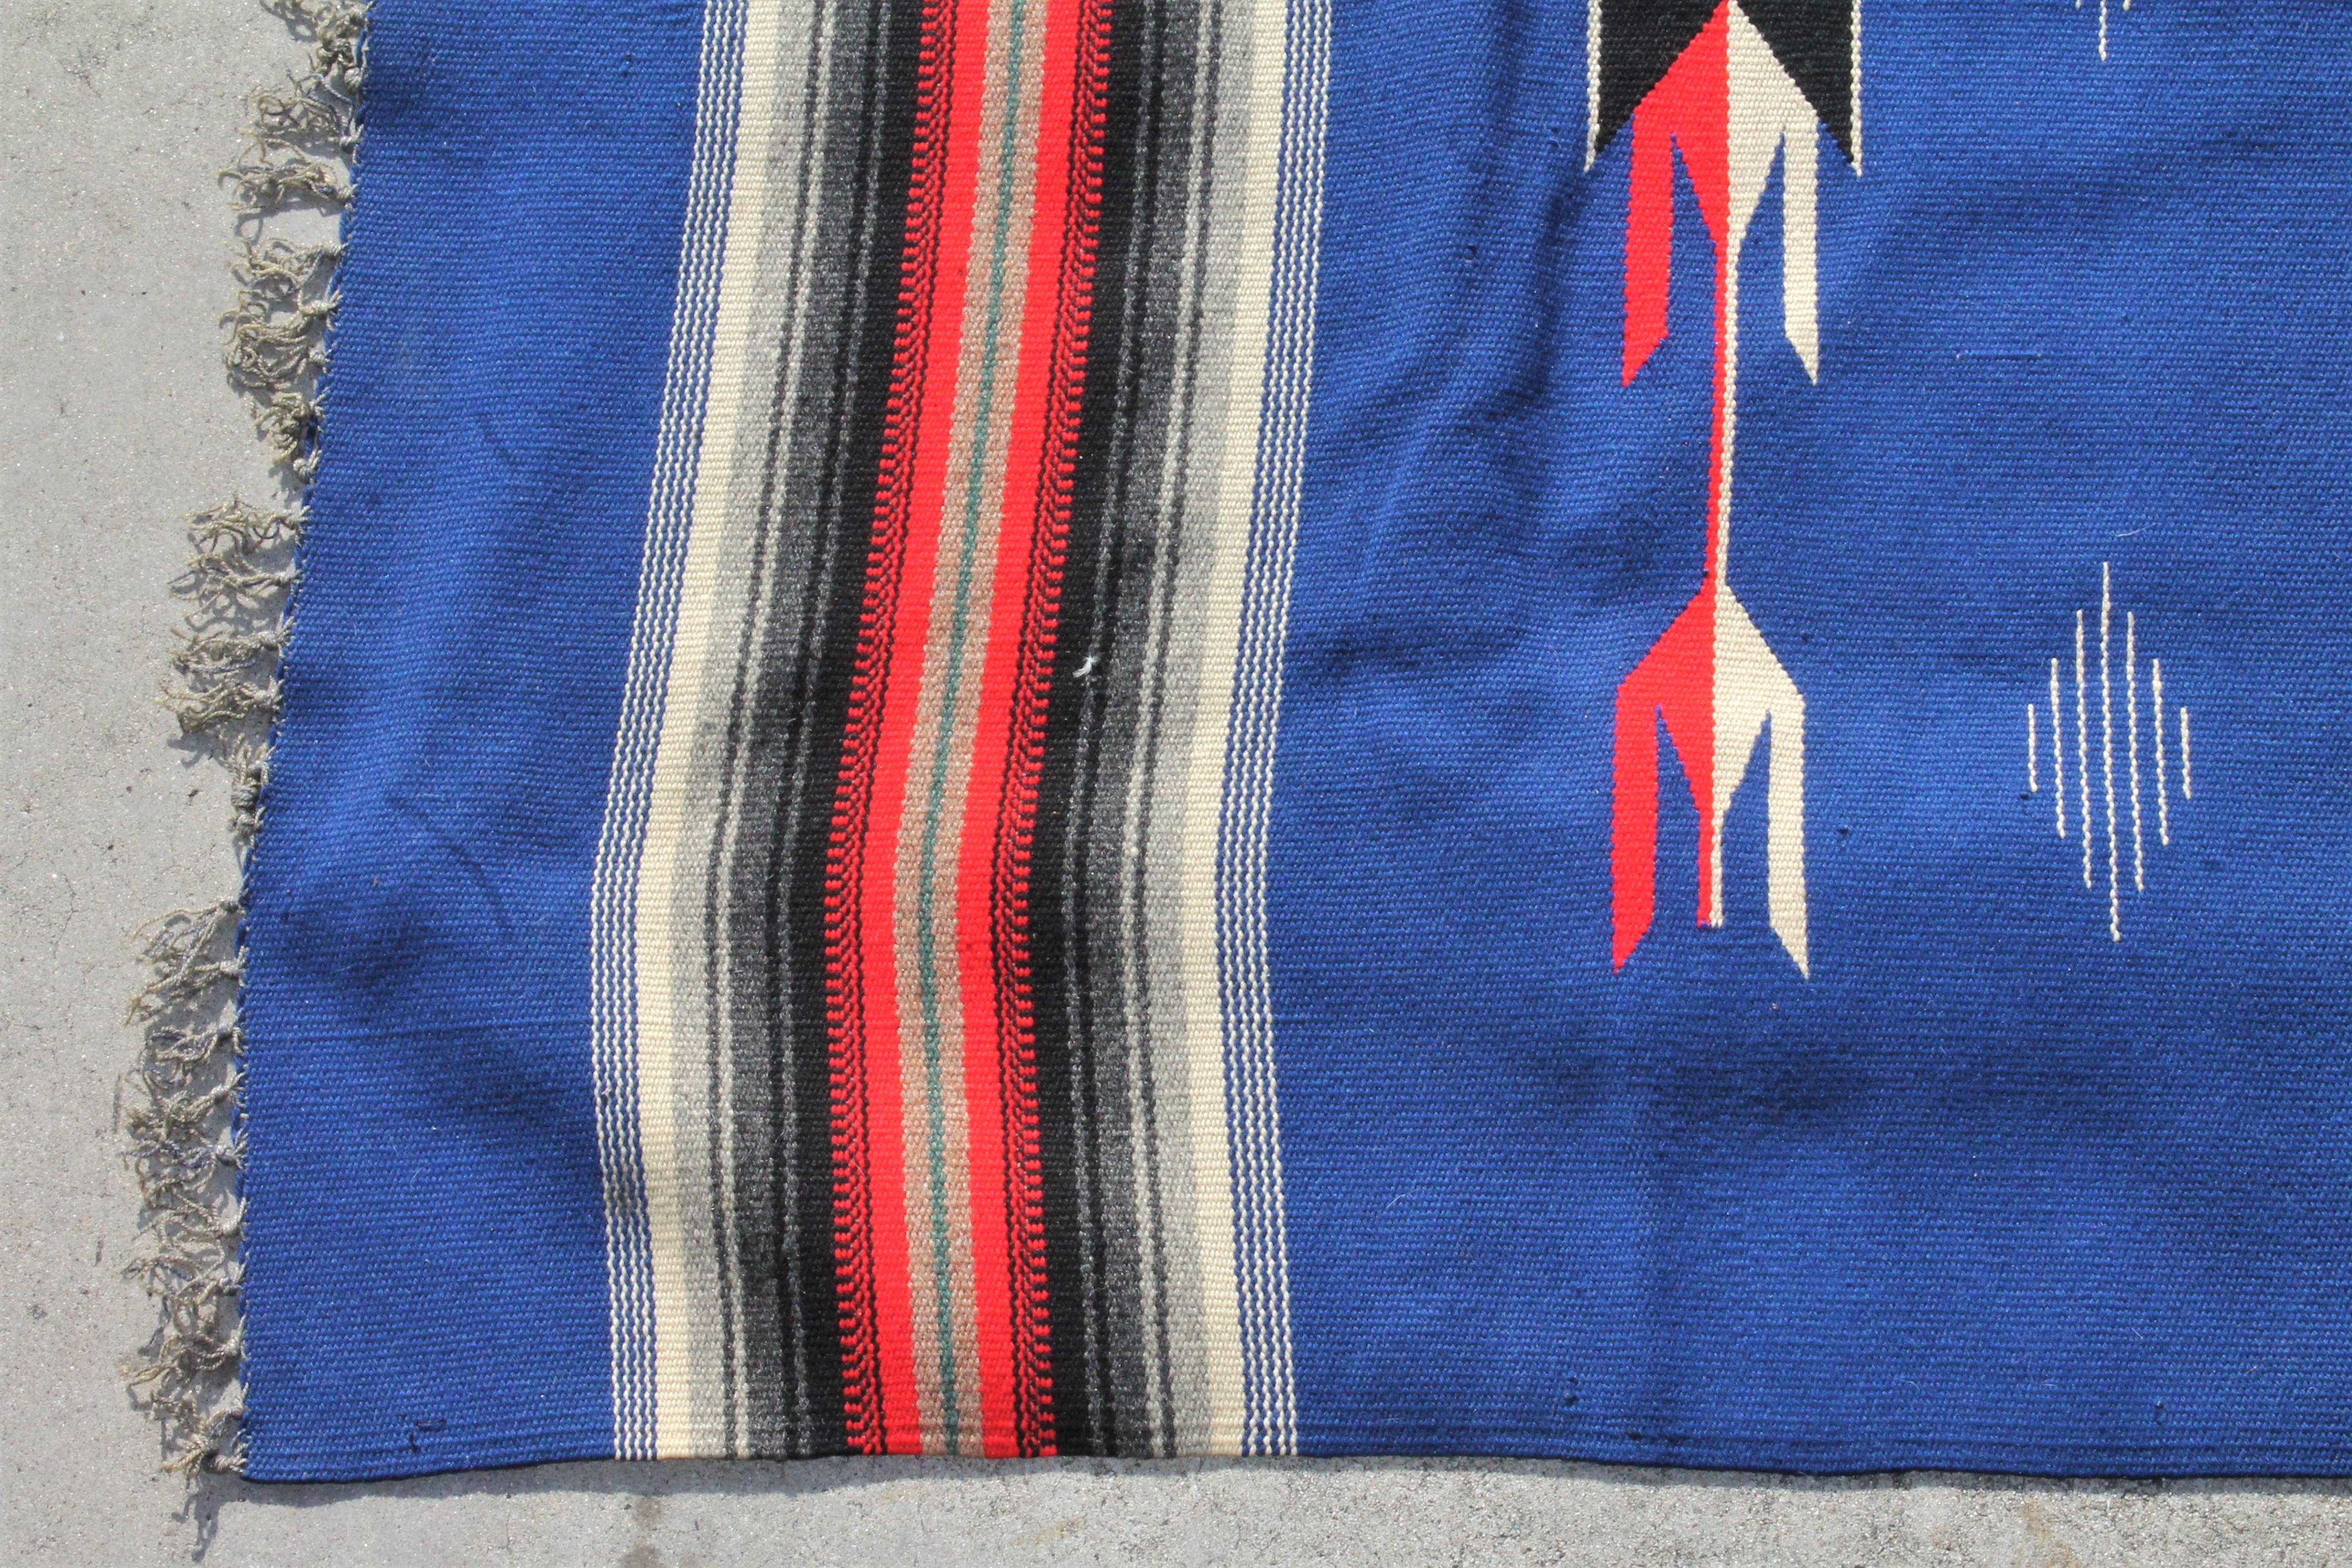 This fine Mexican / American serape weaving is in pristine condition and wonderful unusual colors. The fringe is very good too.